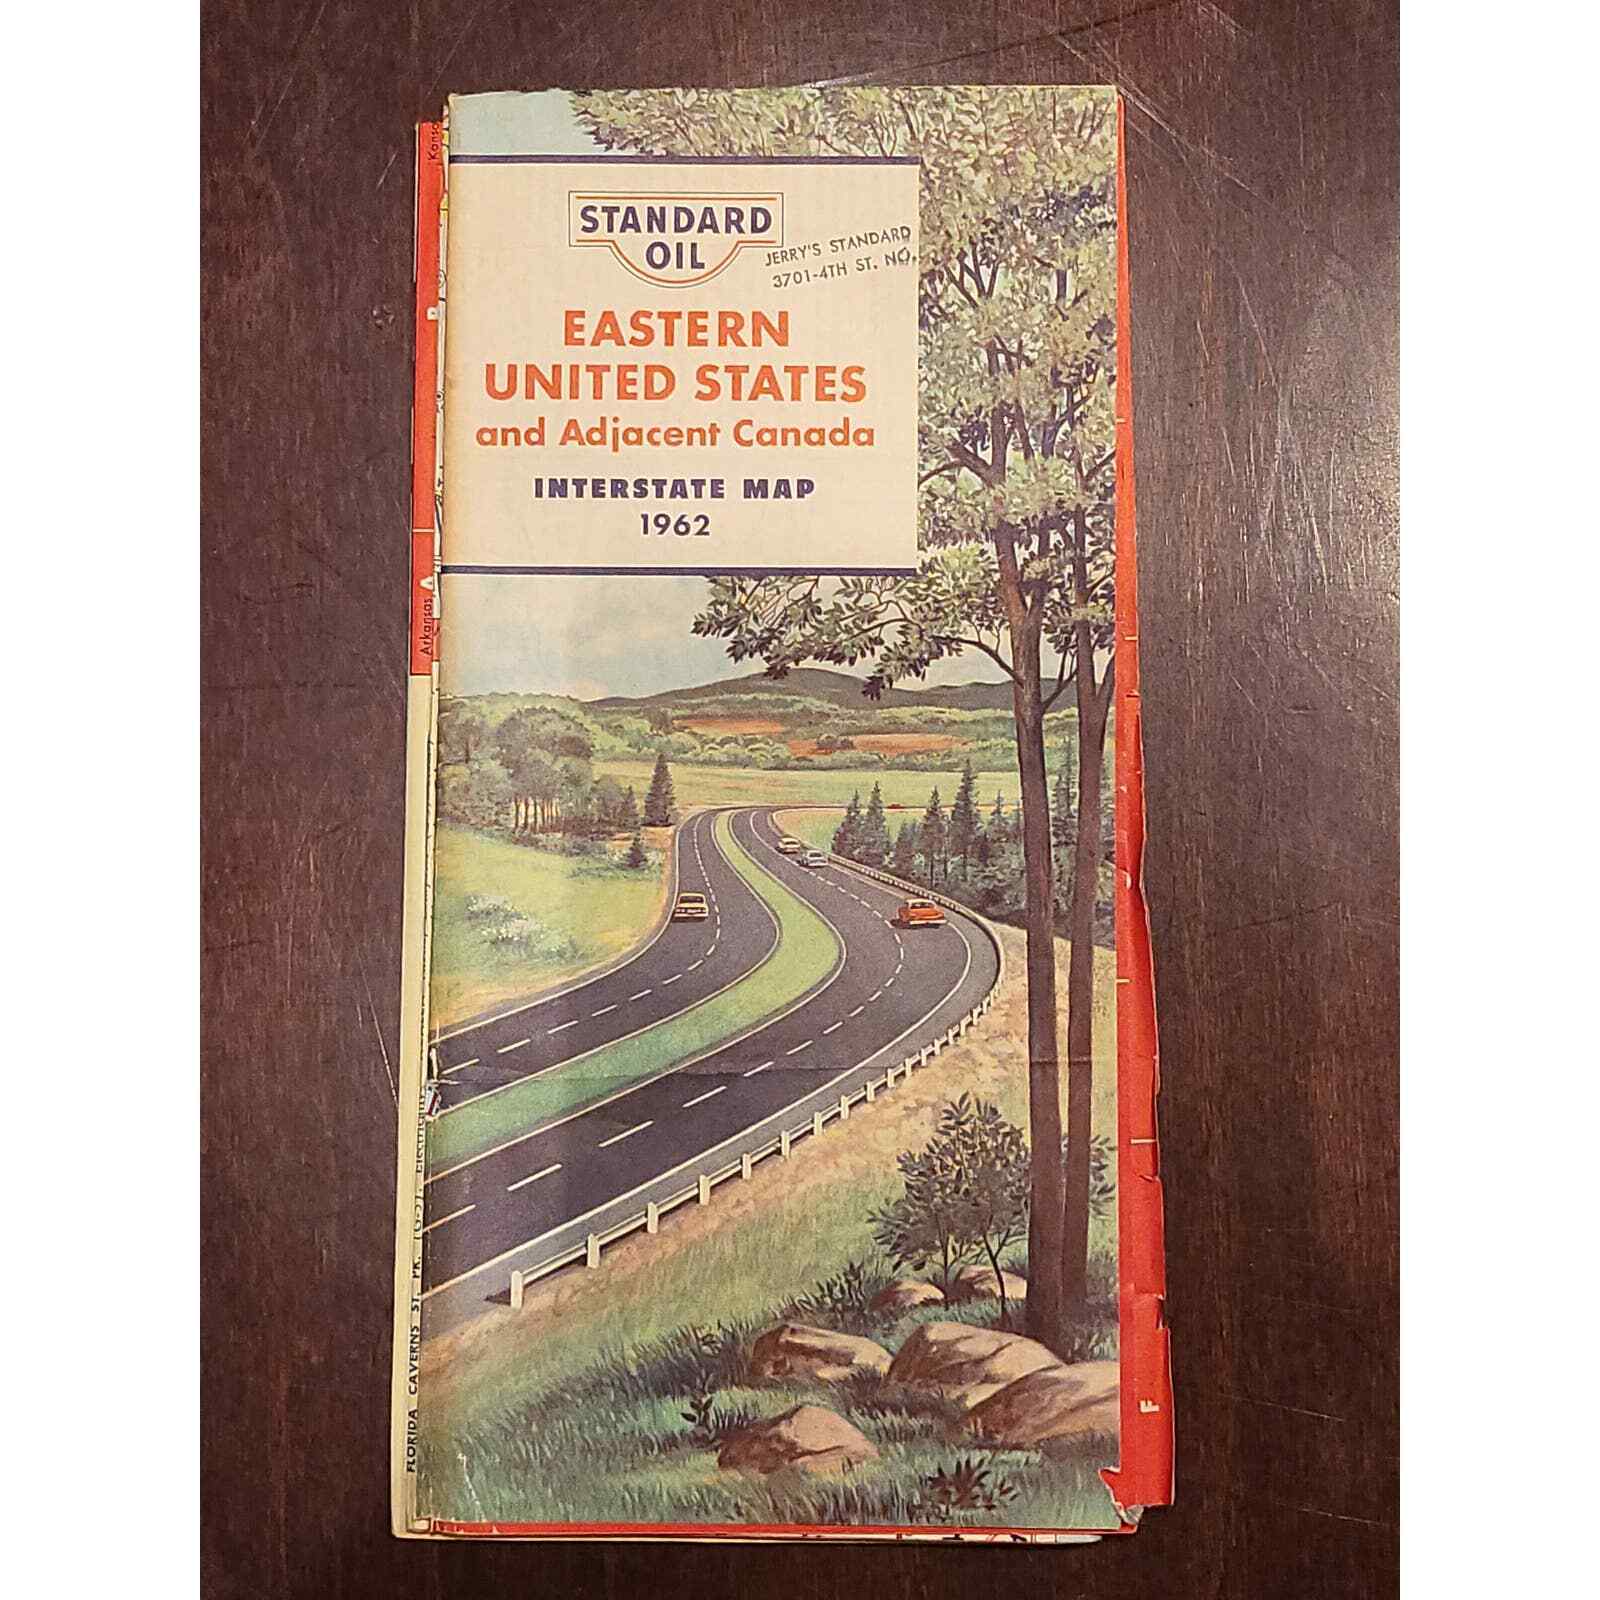 Standard Oil Eastern United States and Canada Interstate Map 1962 Edition